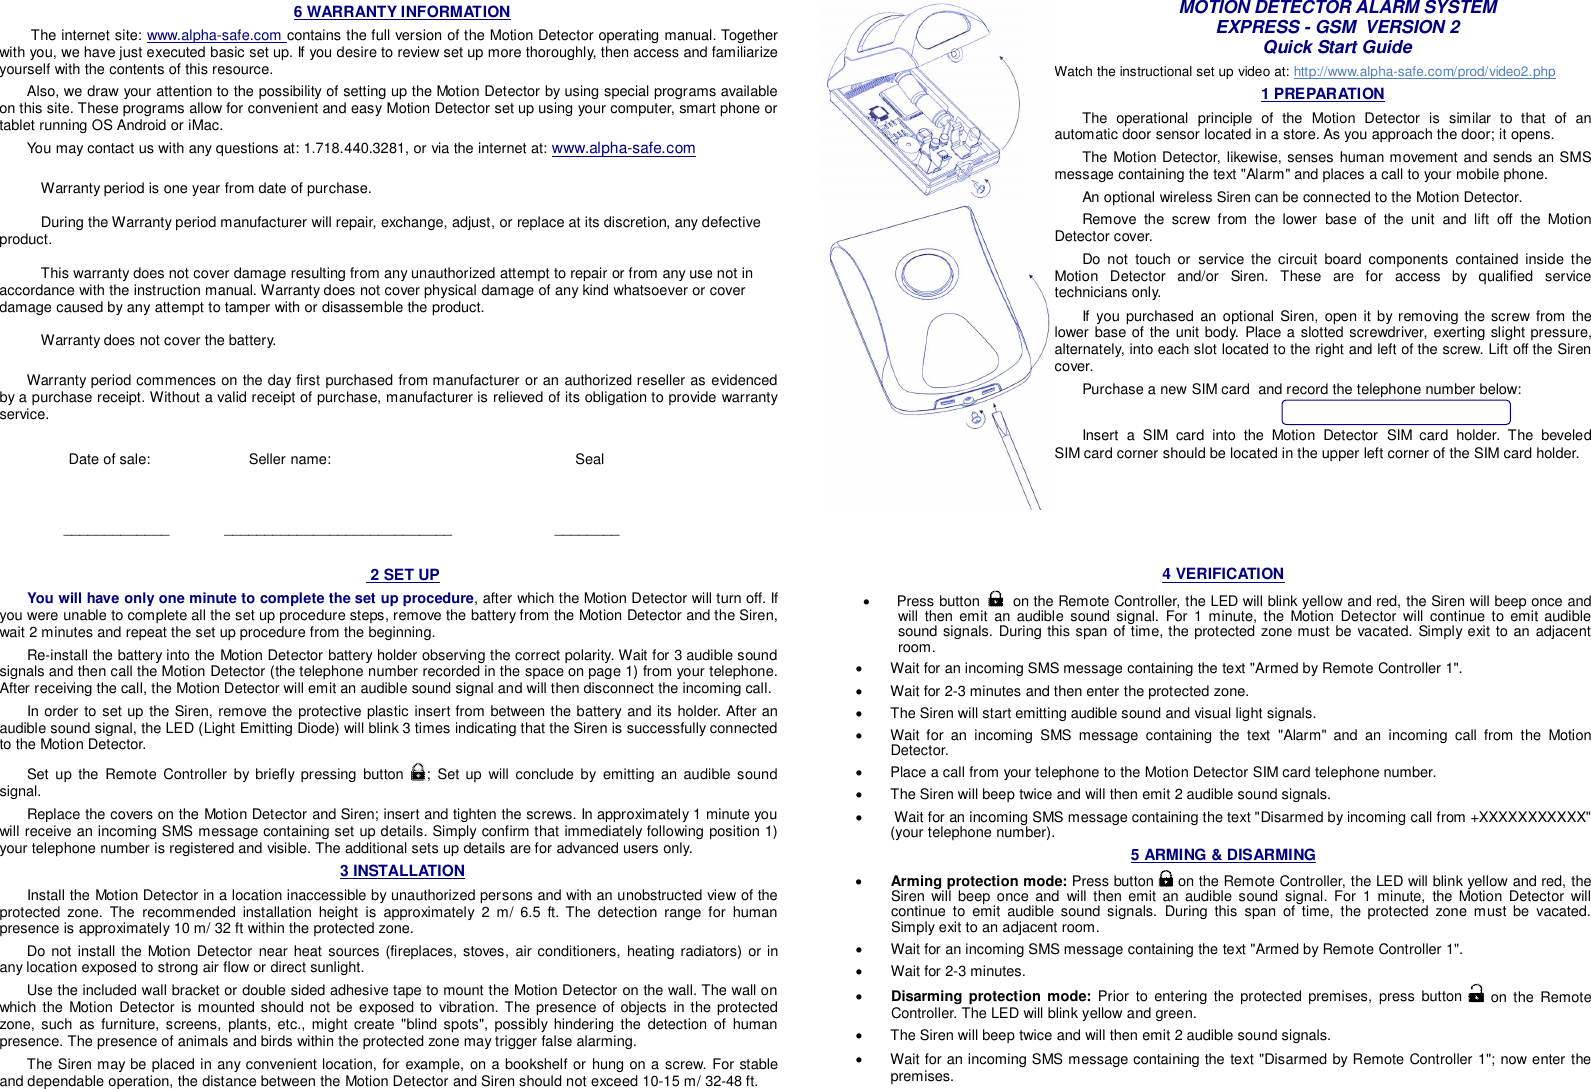 6 WARRANTY INFORMATION  The internet site: www.alpha-safe.com contains the full version of the Motion Detector operating manual. Together with you, we have just executed basic set up. If you desire to review set up more thoroughly, then access and familiarize yourself with the contents of this resource. Also, we draw your attention to the possibility of setting up the Motion Detector by using special programs available on this site. These programs allow for convenient and easy Motion Detector set up using your computer, smart phone or tablet running OS Android or iMac. You may contact us with any questions at: 1.718.440.3281, or via the internet at: www.alpha-safe.com         Warranty period is one year from date of purchase.   During the Warranty period manufacturer will repair, exchange, adjust, or replace at its discretion, any defective product.    This warranty does not cover damage resulting from any unauthorized attempt to repair or from any use not in accordance with the instruction manual. Warranty does not cover physical damage of any kind whatsoever or cover damage caused by any attempt to tamper with or disassemble the product.   Warranty does not cover the battery.   Warranty period commences on the day first purchased from manufacturer or an authorized reseller as evidenced by a purchase receipt. Without a valid receipt of purchase, manufacturer is relieved of its obligation to provide warranty service.            Date of sale:            Seller name:               Seal           _____________      ____________________________                         ________  MOTION DETECTOR ALARM SYSTEM EXPRESS - GSM  VERSION 2 Quick Start Guide Watch the instructional set up video at: http://www.alpha-safe.com/prod/video2.php 1 PREPARATION The operational principle of the Motion Detector is similar to that of an automatic door sensor located in a store. As you approach the door; it opens.  The Motion Detector, likewise, senses human movement and sends an SMS message containing the text &quot;Alarm&quot; and places a call to your mobile phone.  An optional wireless Siren can be connected to the Motion Detector. Remove the screw from the lower base of the unit and lift off the Motion Detector cover. Do not touch or service the circuit board components contained inside the Motion Detector and/or Siren. These are for access by qualified service technicians only. If you purchased an optional Siren, open it by removing the screw from the lower base of the unit body. Place a slotted screwdriver, exerting slight pressure, alternately, into each slot located to the right and left of the screw. Lift off the Siren cover.  Purchase a new SIM card  and record the telephone number below:                                          Insert a SIM card into the Motion Detector SIM card  holder.  The  beveled          SIM card corner should be located in the upper left corner of the SIM card holder.  2 SET UP You will have only one minute to complete the set up procedure, after which the Motion Detector will turn off. If you were unable to complete all the set up procedure steps, remove the battery from the Motion Detector and the Siren, wait 2 minutes and repeat the set up procedure from the beginning. Re-install the battery into the Motion Detector battery holder observing the correct polarity. Wait for 3 audible sound signals and then call the Motion Detector (the telephone number recorded in the space on page 1) from your telephone. After receiving the call, the Motion Detector will emit an audible sound signal and will then disconnect the incoming call. In order to set up the Siren, remove the protective plastic insert from between the battery and its holder. After an audible sound signal, the LED (Light Emitting Diode) will blink 3 times indicating that the Siren is successfully connected to the Motion Detector. Set up the Remote Controller by briefly pressing button  ; Set up will conclude by emitting an audible sound signal. Replace the covers on the Motion Detector and Siren; insert and tighten the screws. In approximately 1 minute you will receive an incoming SMS message containing set up details. Simply confirm that immediately following position 1) your telephone number is registered and visible. The additional sets up details are for advanced users only.  3 INSTALLATION Install the Motion Detector in a location inaccessible by unauthorized persons and with an unobstructed view of the protected zone. The recommended installation height is approximately 2 m/ 6.5 ft. The detection range for human presence is approximately 10 m/ 32 ft within the protected zone. Do not install the Motion Detector near heat sources (fireplaces, stoves, air conditioners, heating radiators) or in any location exposed to strong air flow or direct sunlight. Use the included wall bracket or double sided adhesive tape to mount the Motion Detector on the wall. The wall on which the Motion Detector is mounted should not be exposed to vibration. The presence of objects in the protected zone, such as furniture, screens, plants, etc., might create &quot;blind spots&quot;, possibly hindering the detection of human presence. The presence of animals and birds within the protected zone may trigger false alarming.  The Siren may be placed in any convenient location, for example, on a bookshelf or hung on a screw. For stable and dependable operation, the distance between the Motion Detector and Siren should not exceed 10-15 m/ 32-48 ft.  4 VERIFICATION   Press button     on the Remote Controller, the LED will blink yellow and red, the Siren will beep once and will then emit an audible sound signal. For 1 minute, the Motion Detector will continue to emit audible sound signals. During this span of time, the protected zone must be vacated. Simply exit to an adjacent room.   Wait for an incoming SMS message containing the text &quot;Armed by Remote Controller 1&quot;.    Wait for 2-3 minutes and then enter the protected zone.   The Siren will start emitting audible sound and visual light signals.   Wait for an incoming SMS message containing the text &quot;Alarm&quot; and an incoming call from the Motion Detector.   Place a call from your telephone to the Motion Detector SIM card telephone number.   The Siren will beep twice and will then emit 2 audible sound signals.    Wait for an incoming SMS message containing the text &quot;Disarmed by incoming call from +XXXXXXXXXXX&quot; (your telephone number). 5 ARMING &amp; DISARMING   Arming protection mode: Press button   on the Remote Controller, the LED will blink yellow and red, the Siren will beep once and will then emit an audible sound signal. For 1 minute, the Motion Detector will continue to emit audible sound signals. During this span of time, the protected zone must be vacated. Simply exit to an adjacent room.   Wait for an incoming SMS message containing the text &quot;Armed by Remote Controller 1&quot;.   Wait for 2-3 minutes.  Disarming protection mode: Prior to entering the protected premises, press button   on the Remote Controller. The LED will blink yellow and green.    The Siren will beep twice and will then emit 2 audible sound signals.   Wait for an incoming SMS message containing the text &quot;Disarmed by Remote Controller 1&quot;; now enter the premises.  